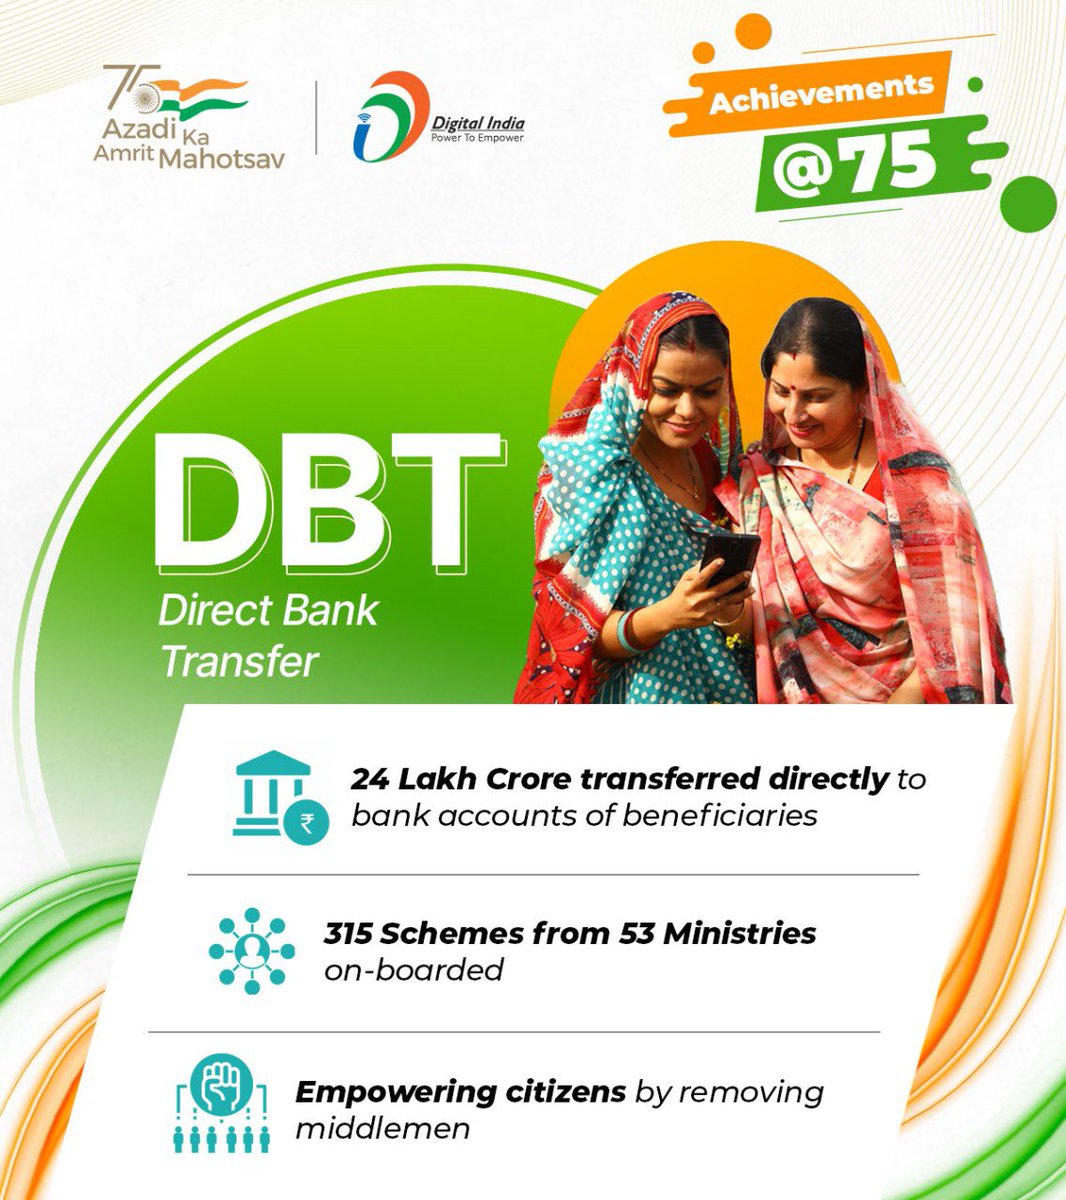 #DigitalIndia | #DBT has improved efficiency in service delivery and has ensured financial inclusion by removing middlemen and transferring over 24 Lakh crores directly to the bank accounts of the citizens. #AmritMahotsav @FinMinIndia @IPPBOnline